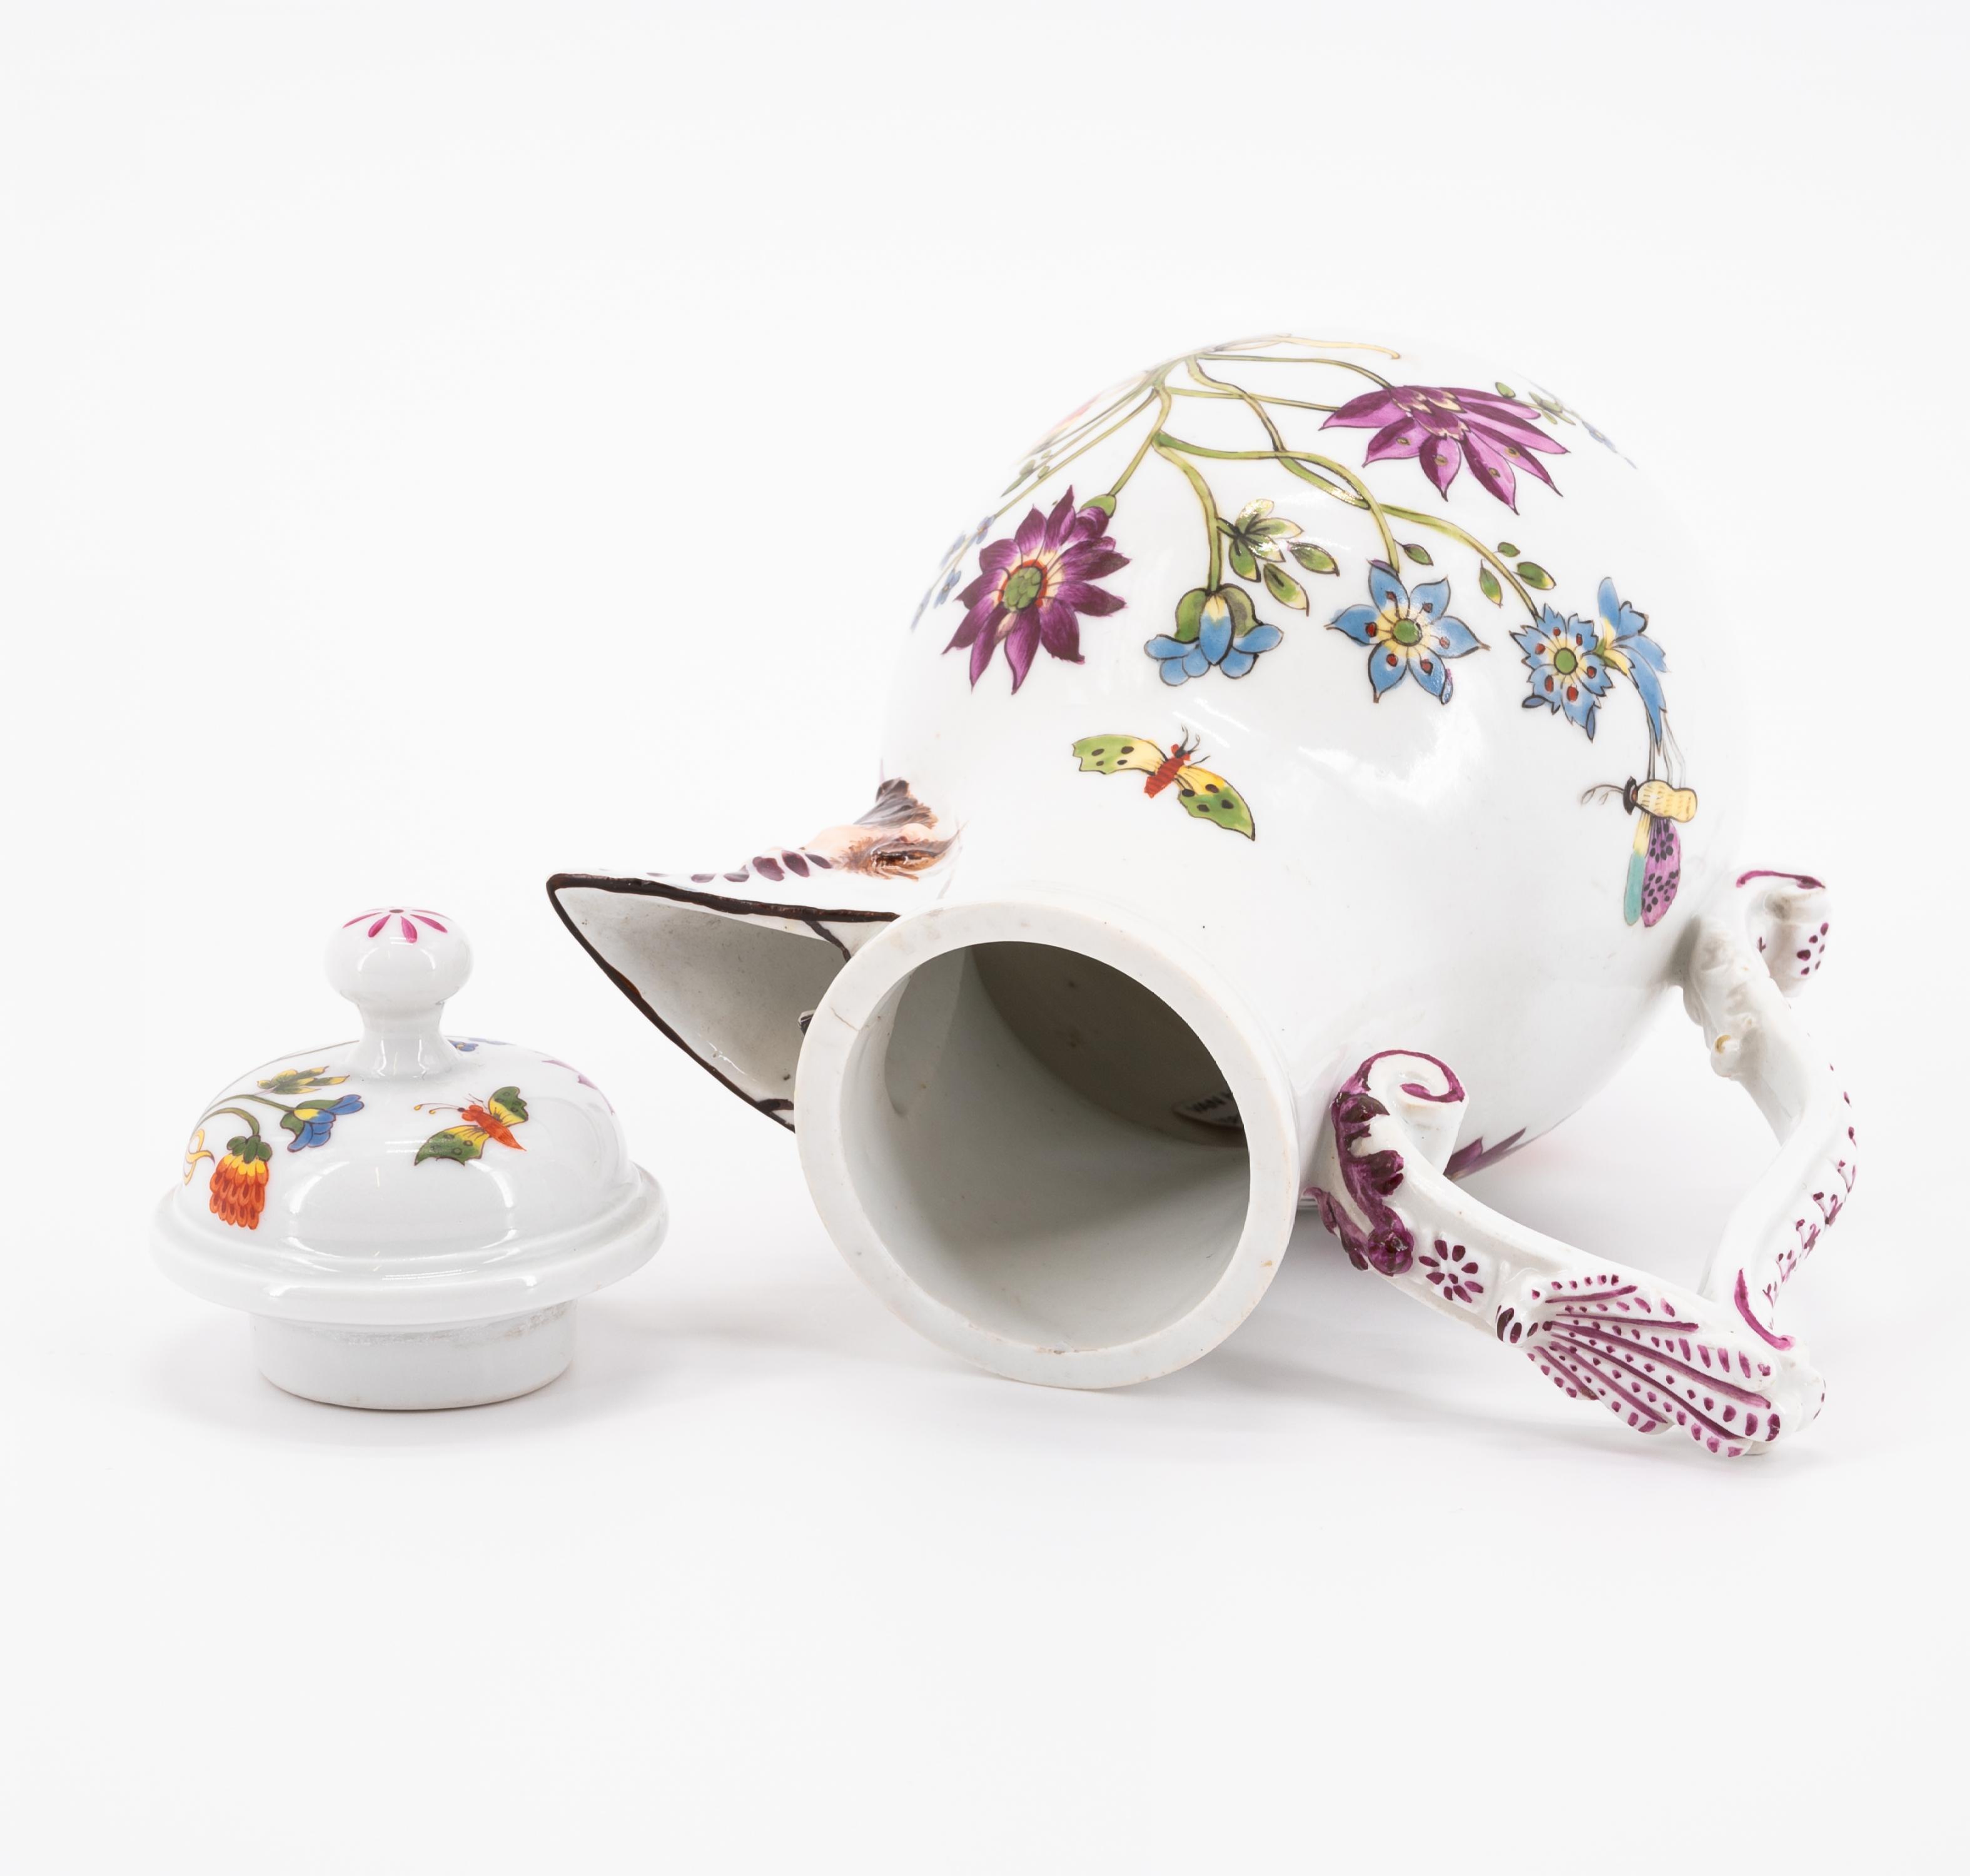 PORCELAIN COFFEE POT, CUP AND SAUCER WITH BUTTERFLY DECOR - Image 10 of 11